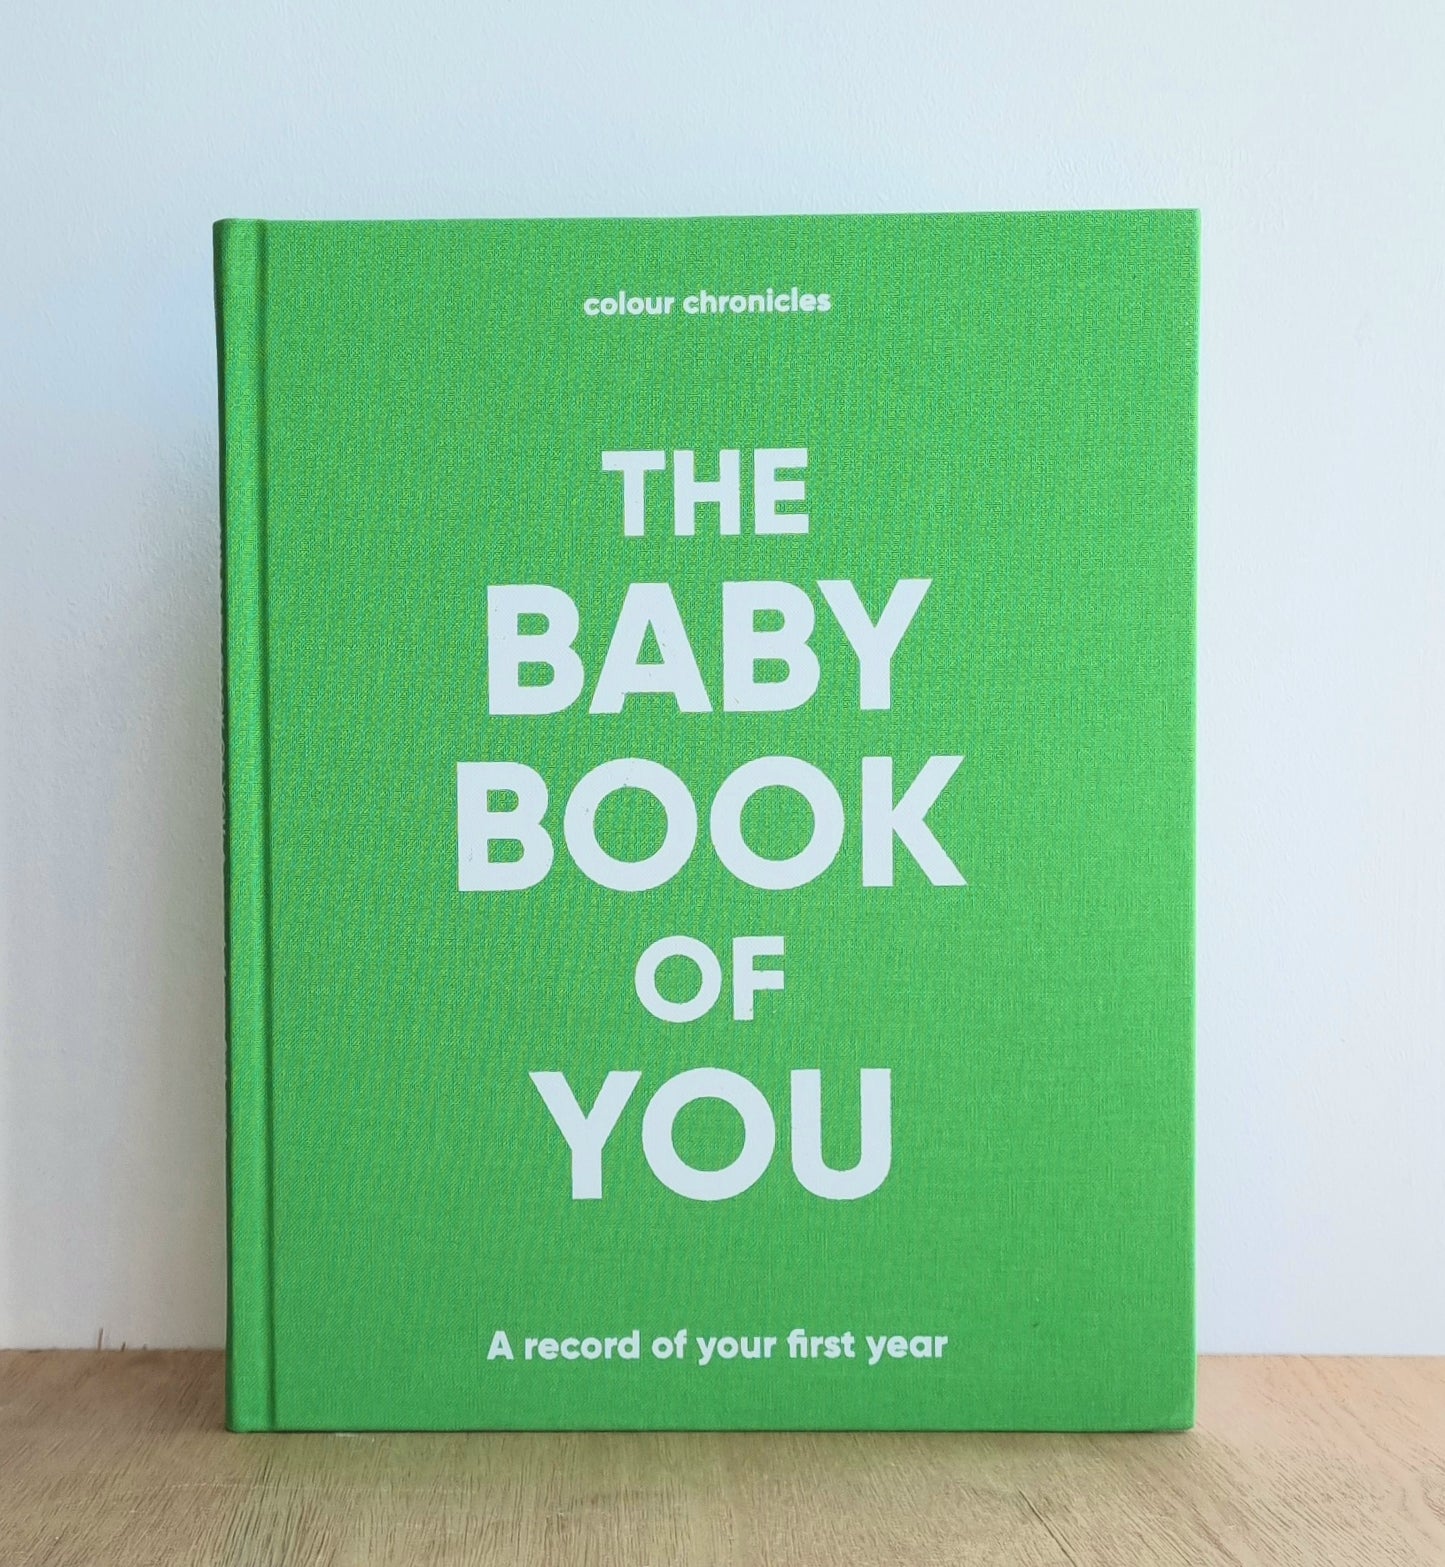 The baby book of you